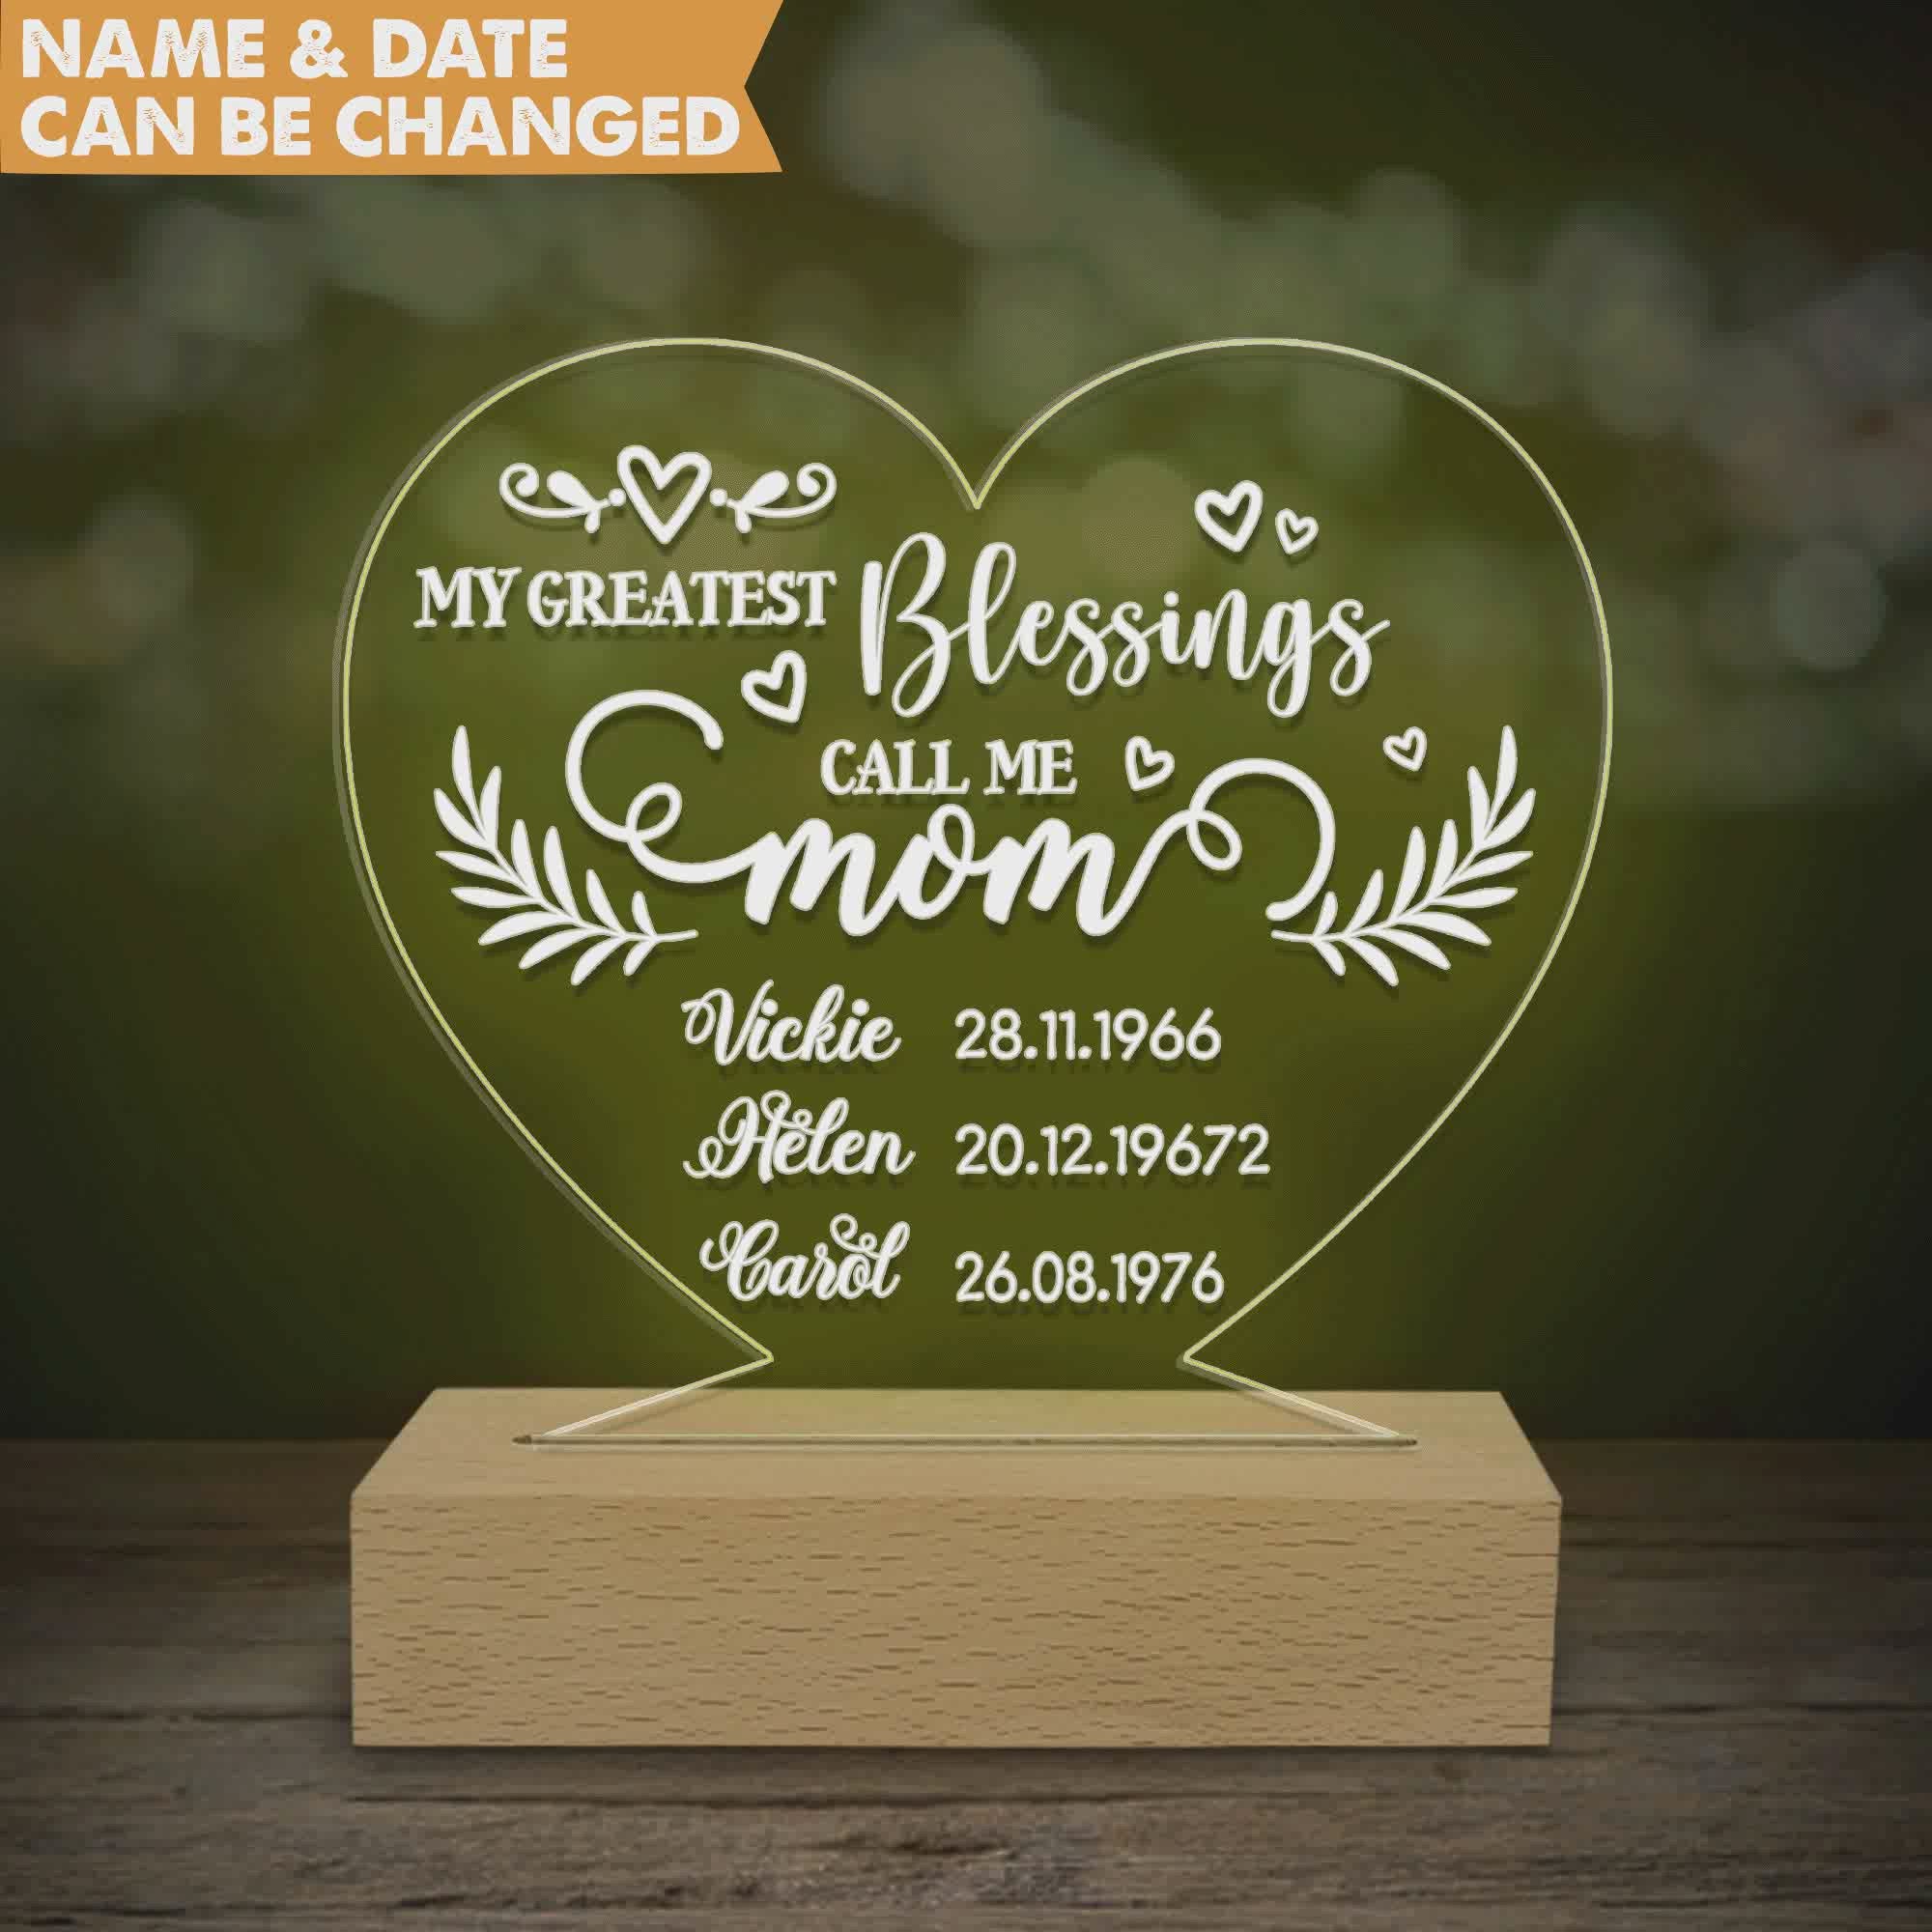 My Greatest Blessings Call Me Mom - Personalized Acrylic Night Light